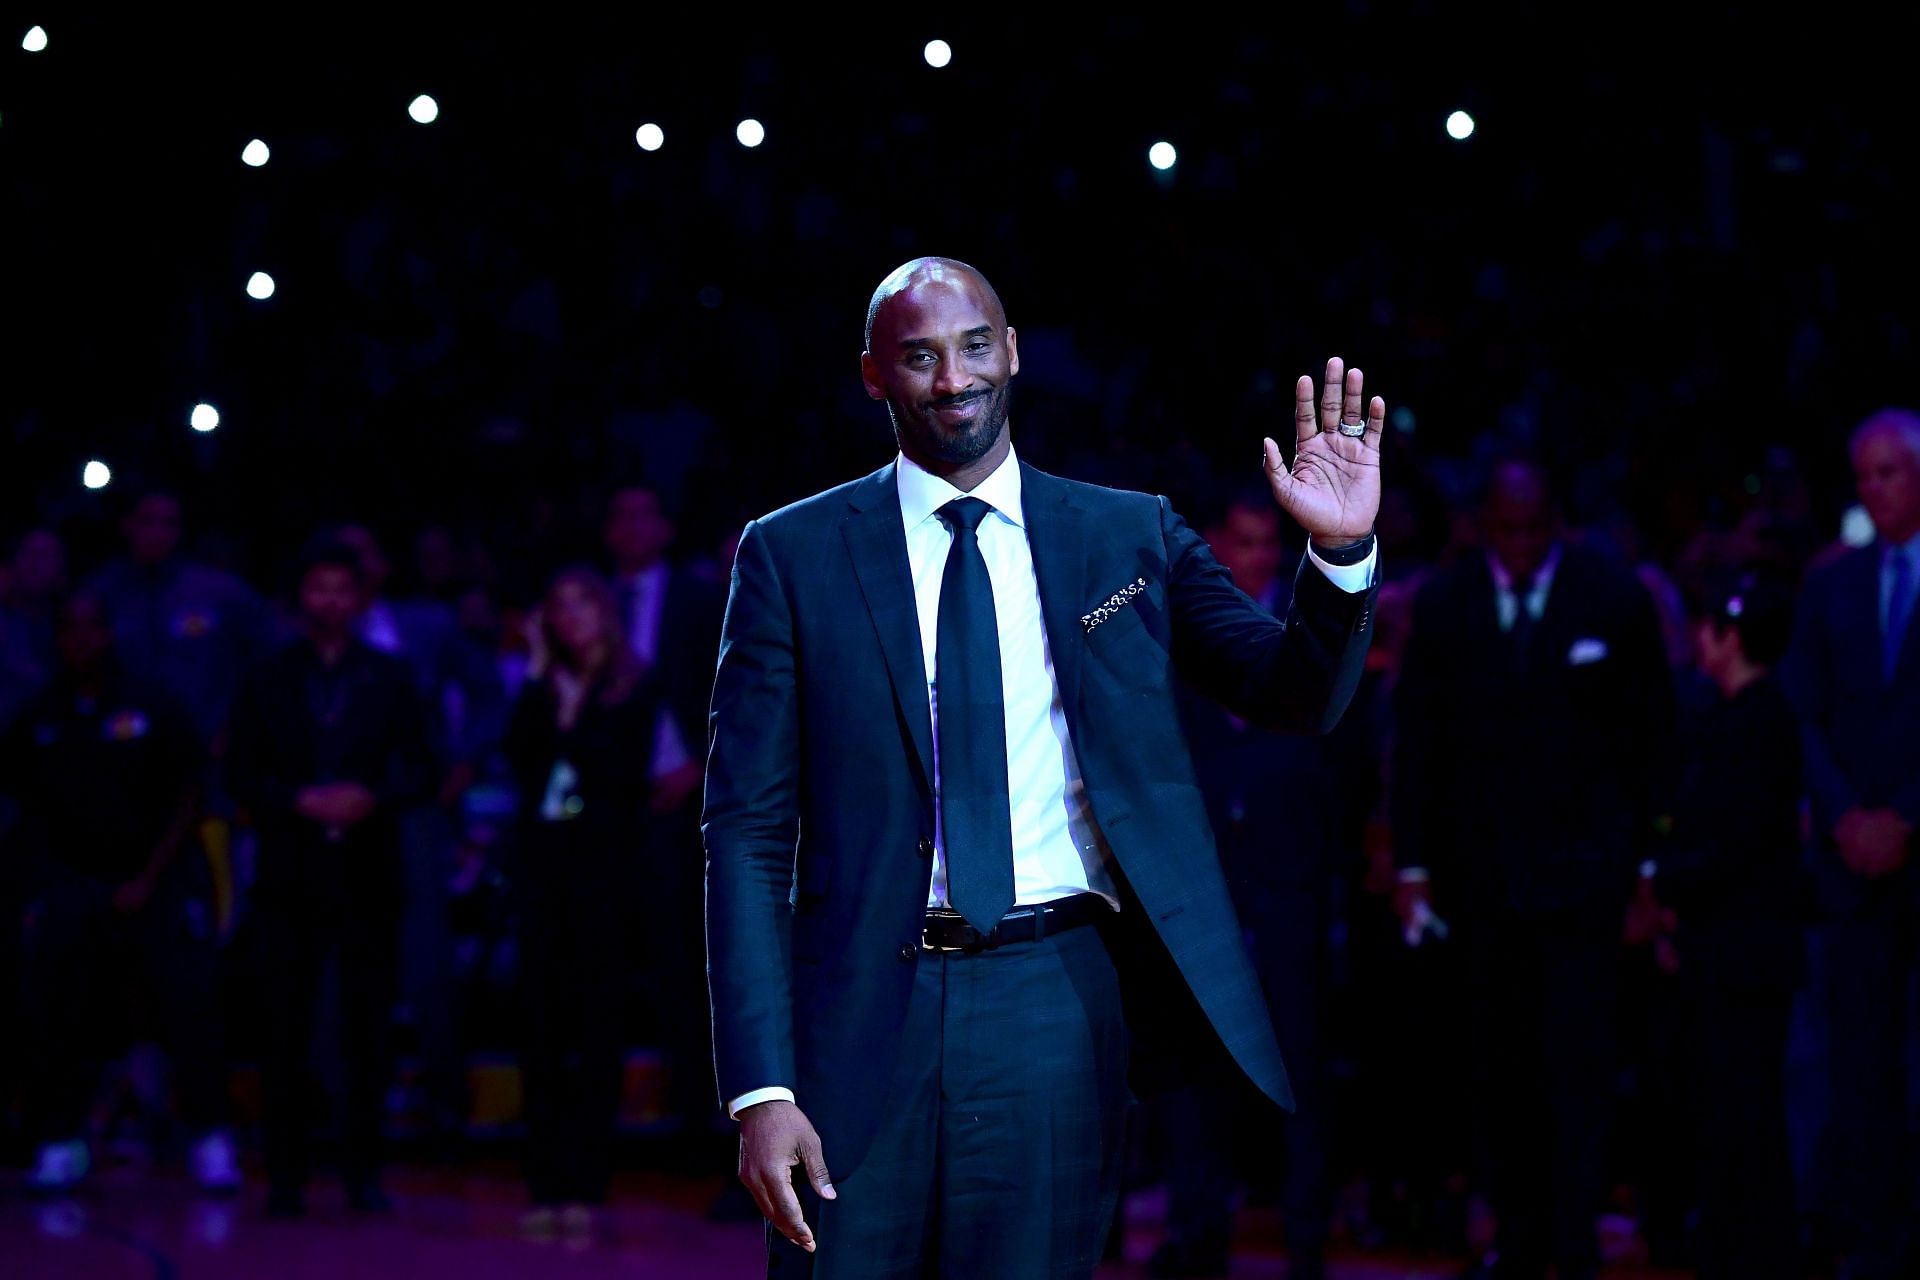 Kobe Bryant smiles at halftime as both his #8 and #24 Los Angeles Lakers jerseys are retired at Staples Center on December 18, 2017 in Los Angeles, California.